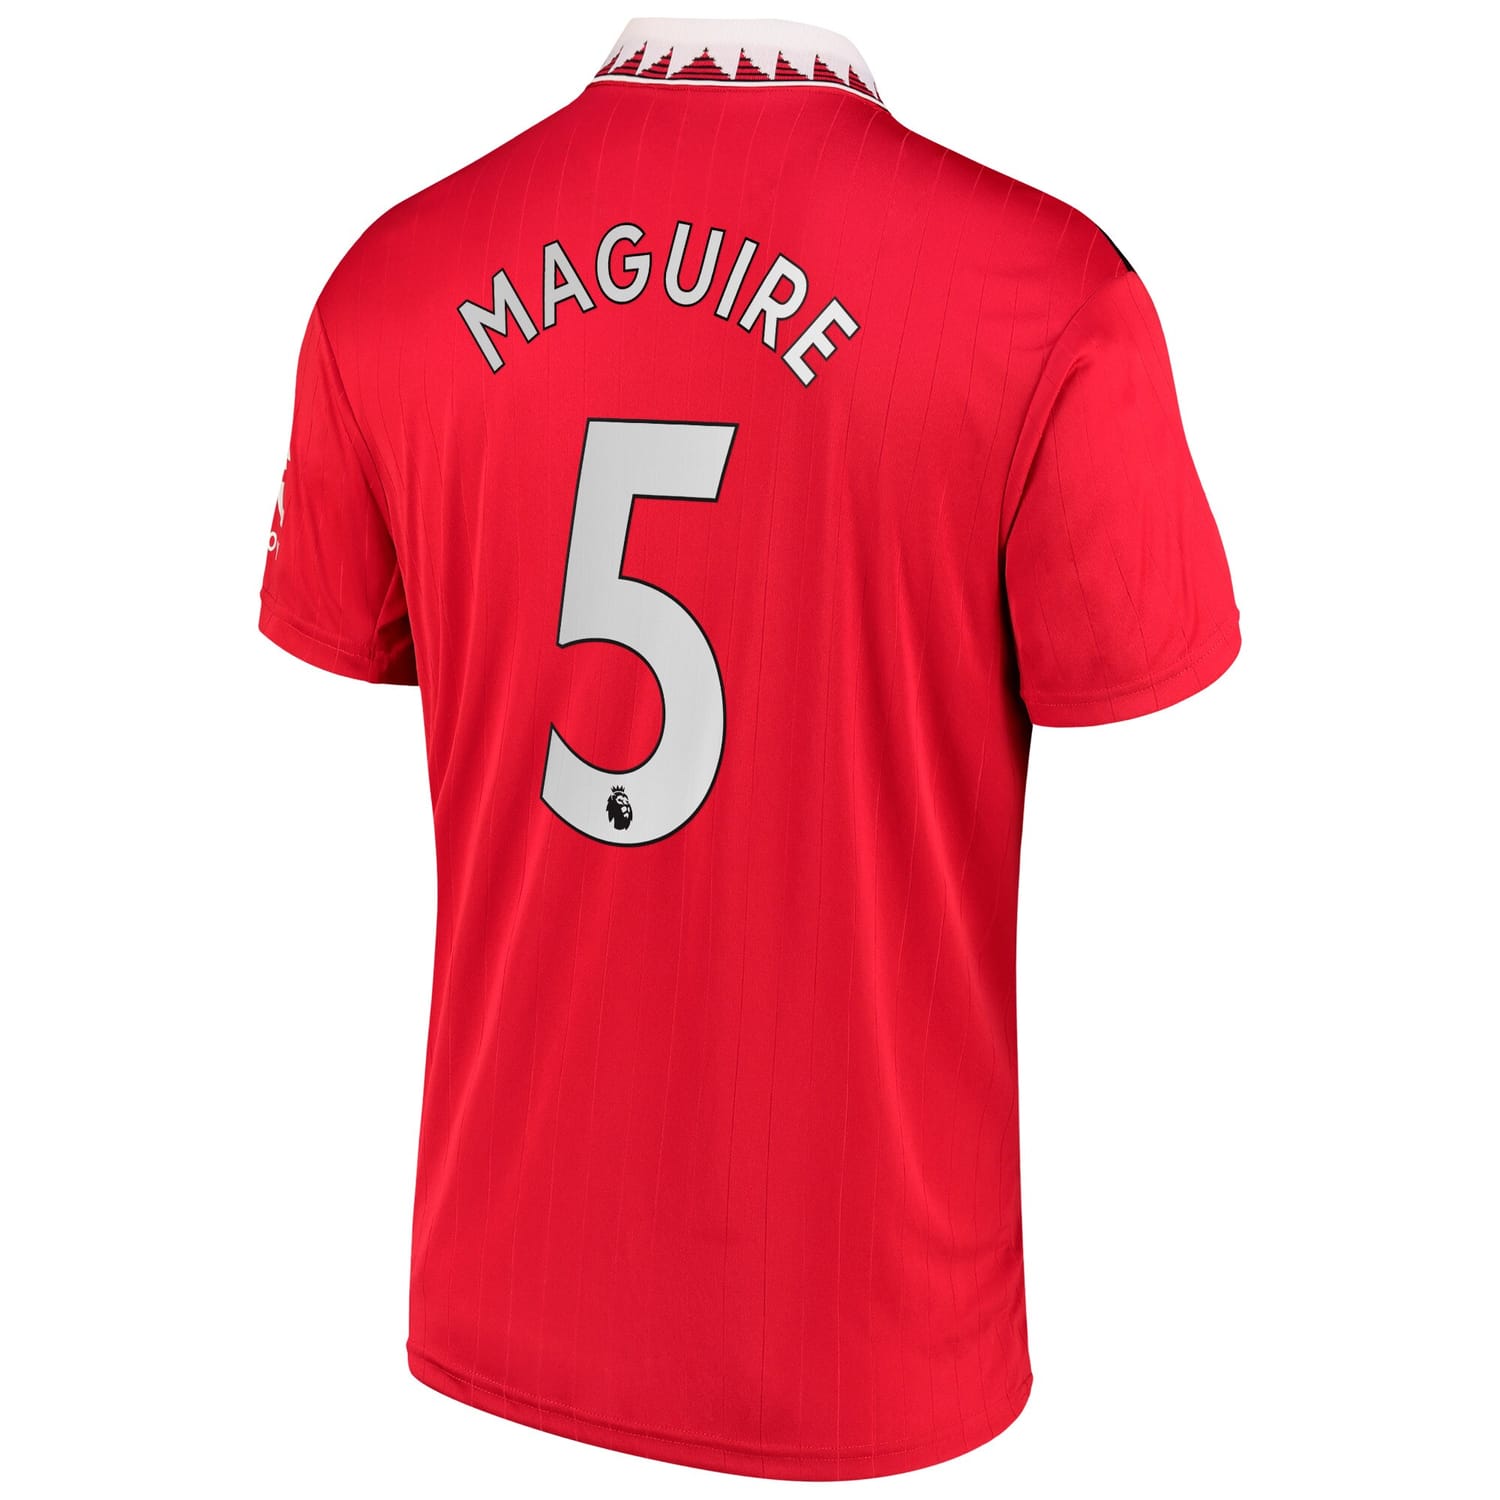 Premier League Manchester United Home Jersey Shirt Red 2022-23 player Harry Maguire printing for Men